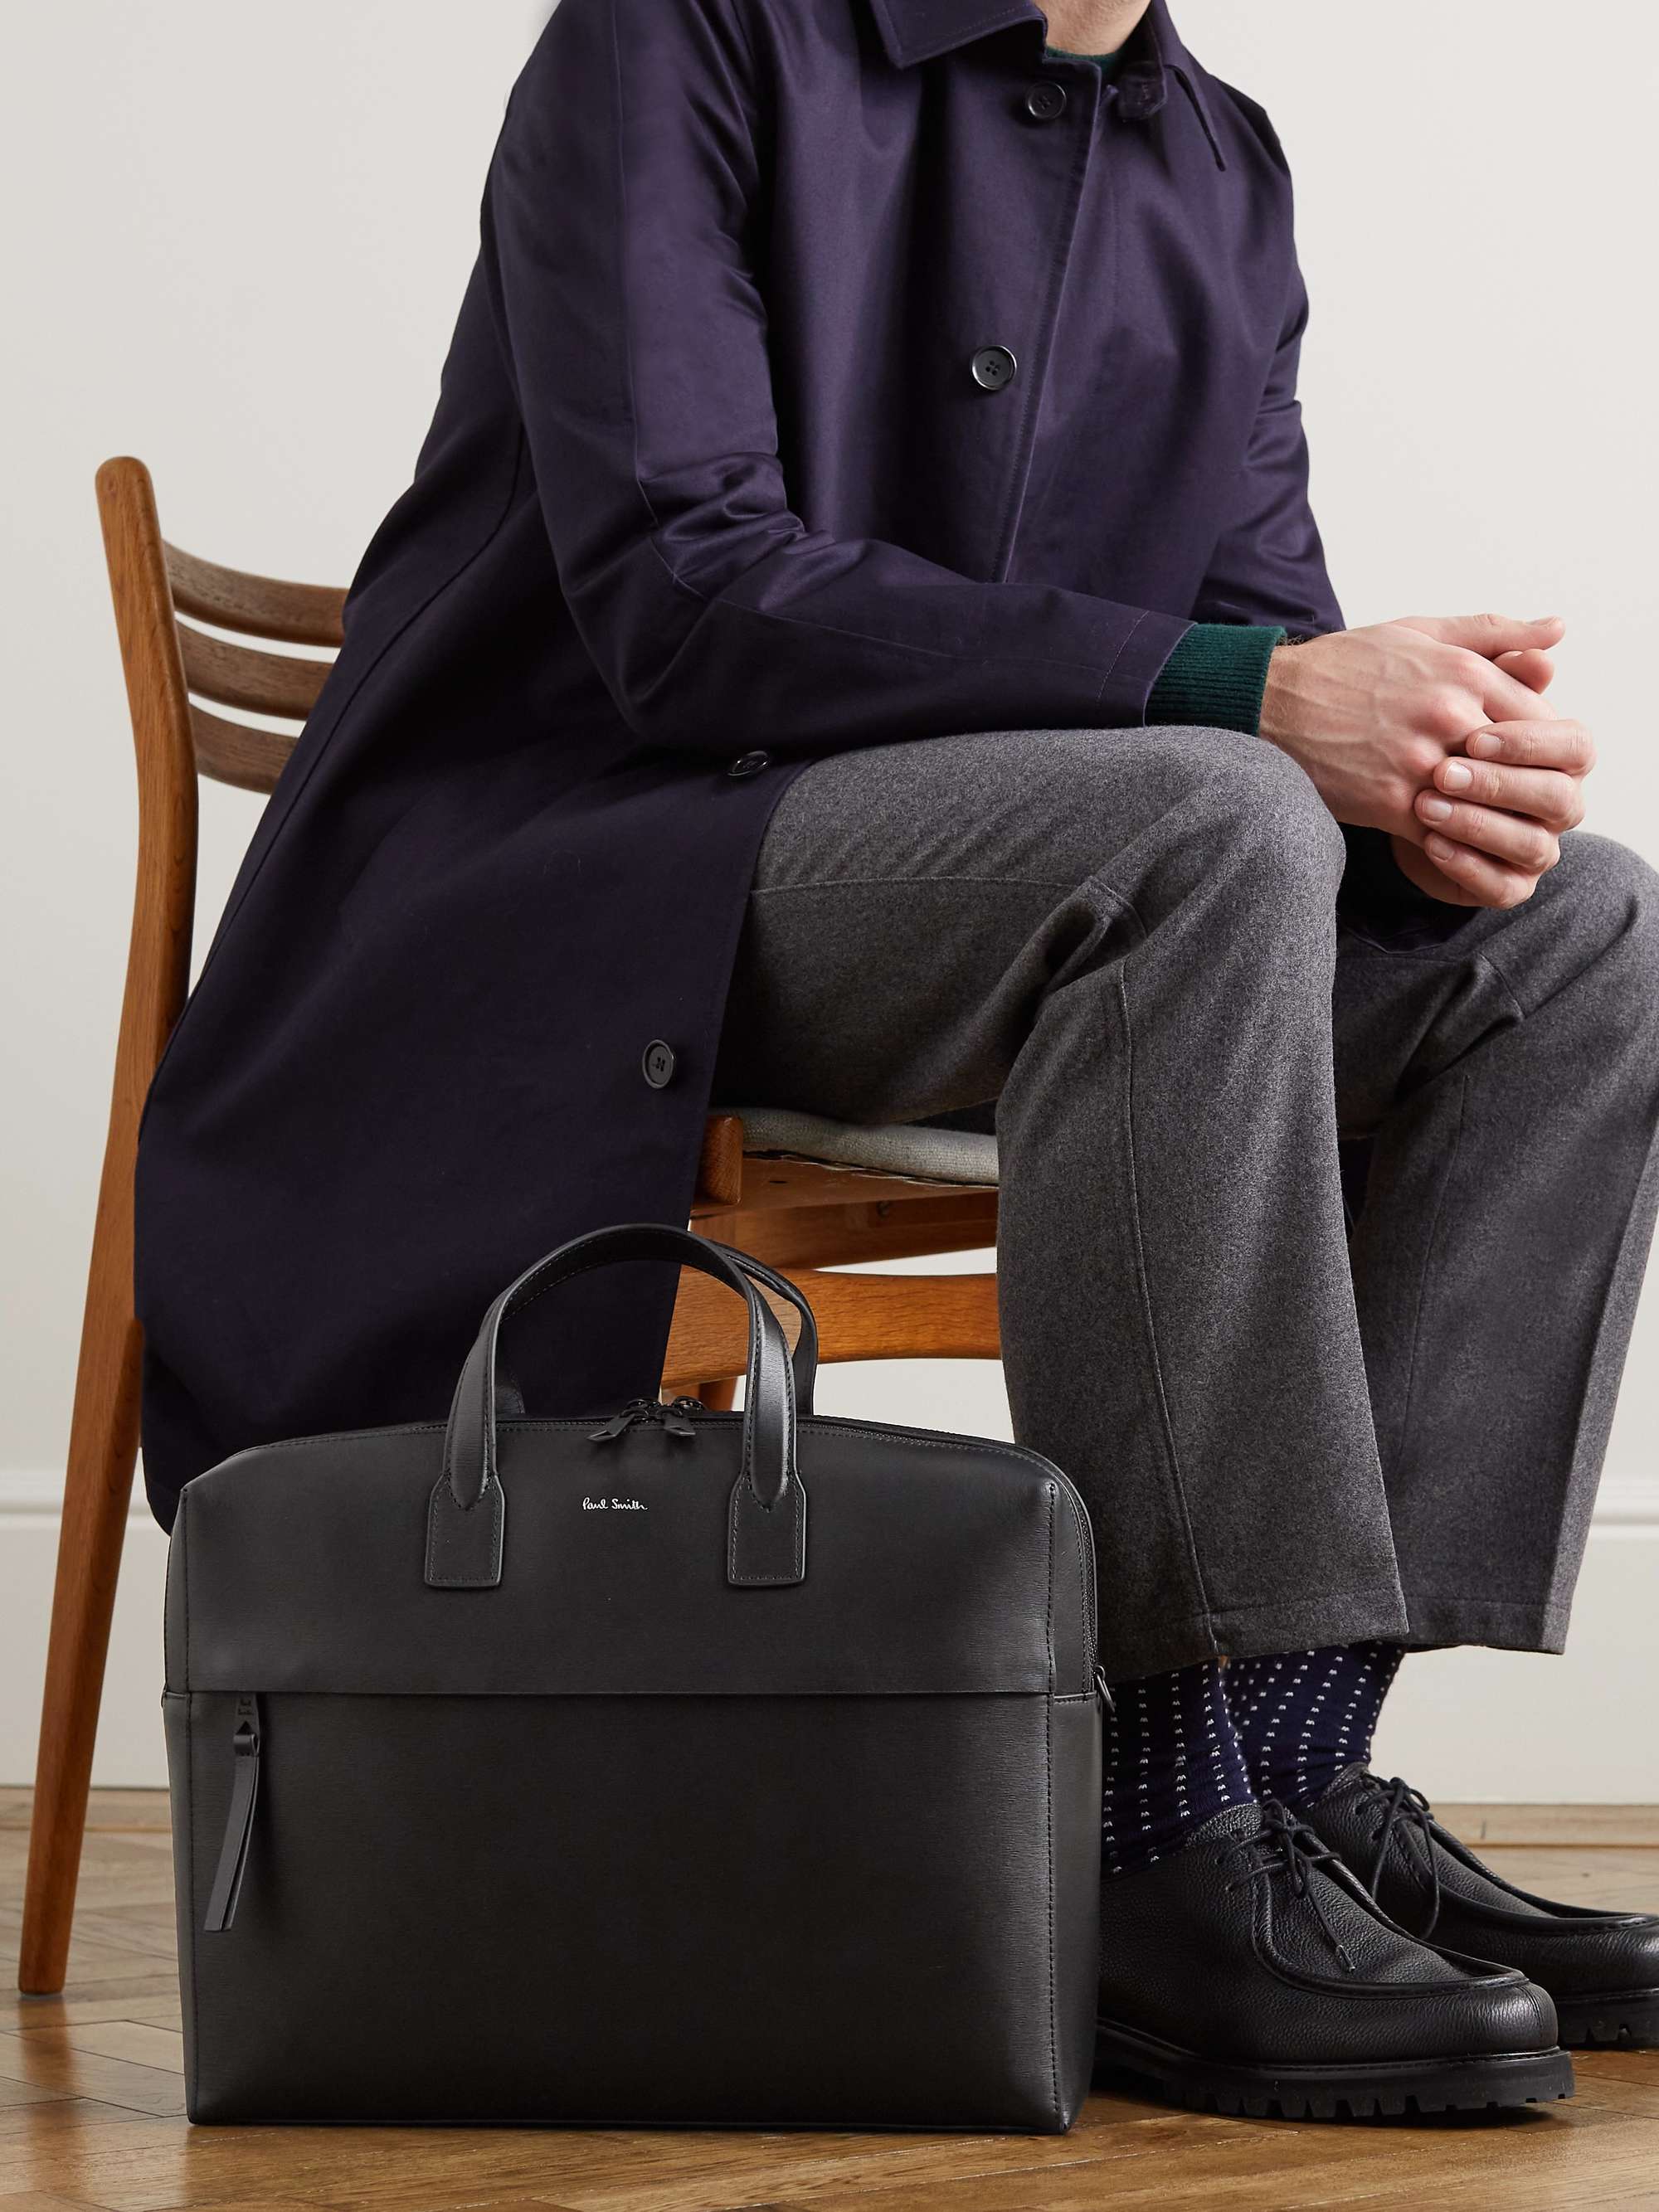 Black Textured-Leather Briefcase | PAUL SMITH | MR PORTER